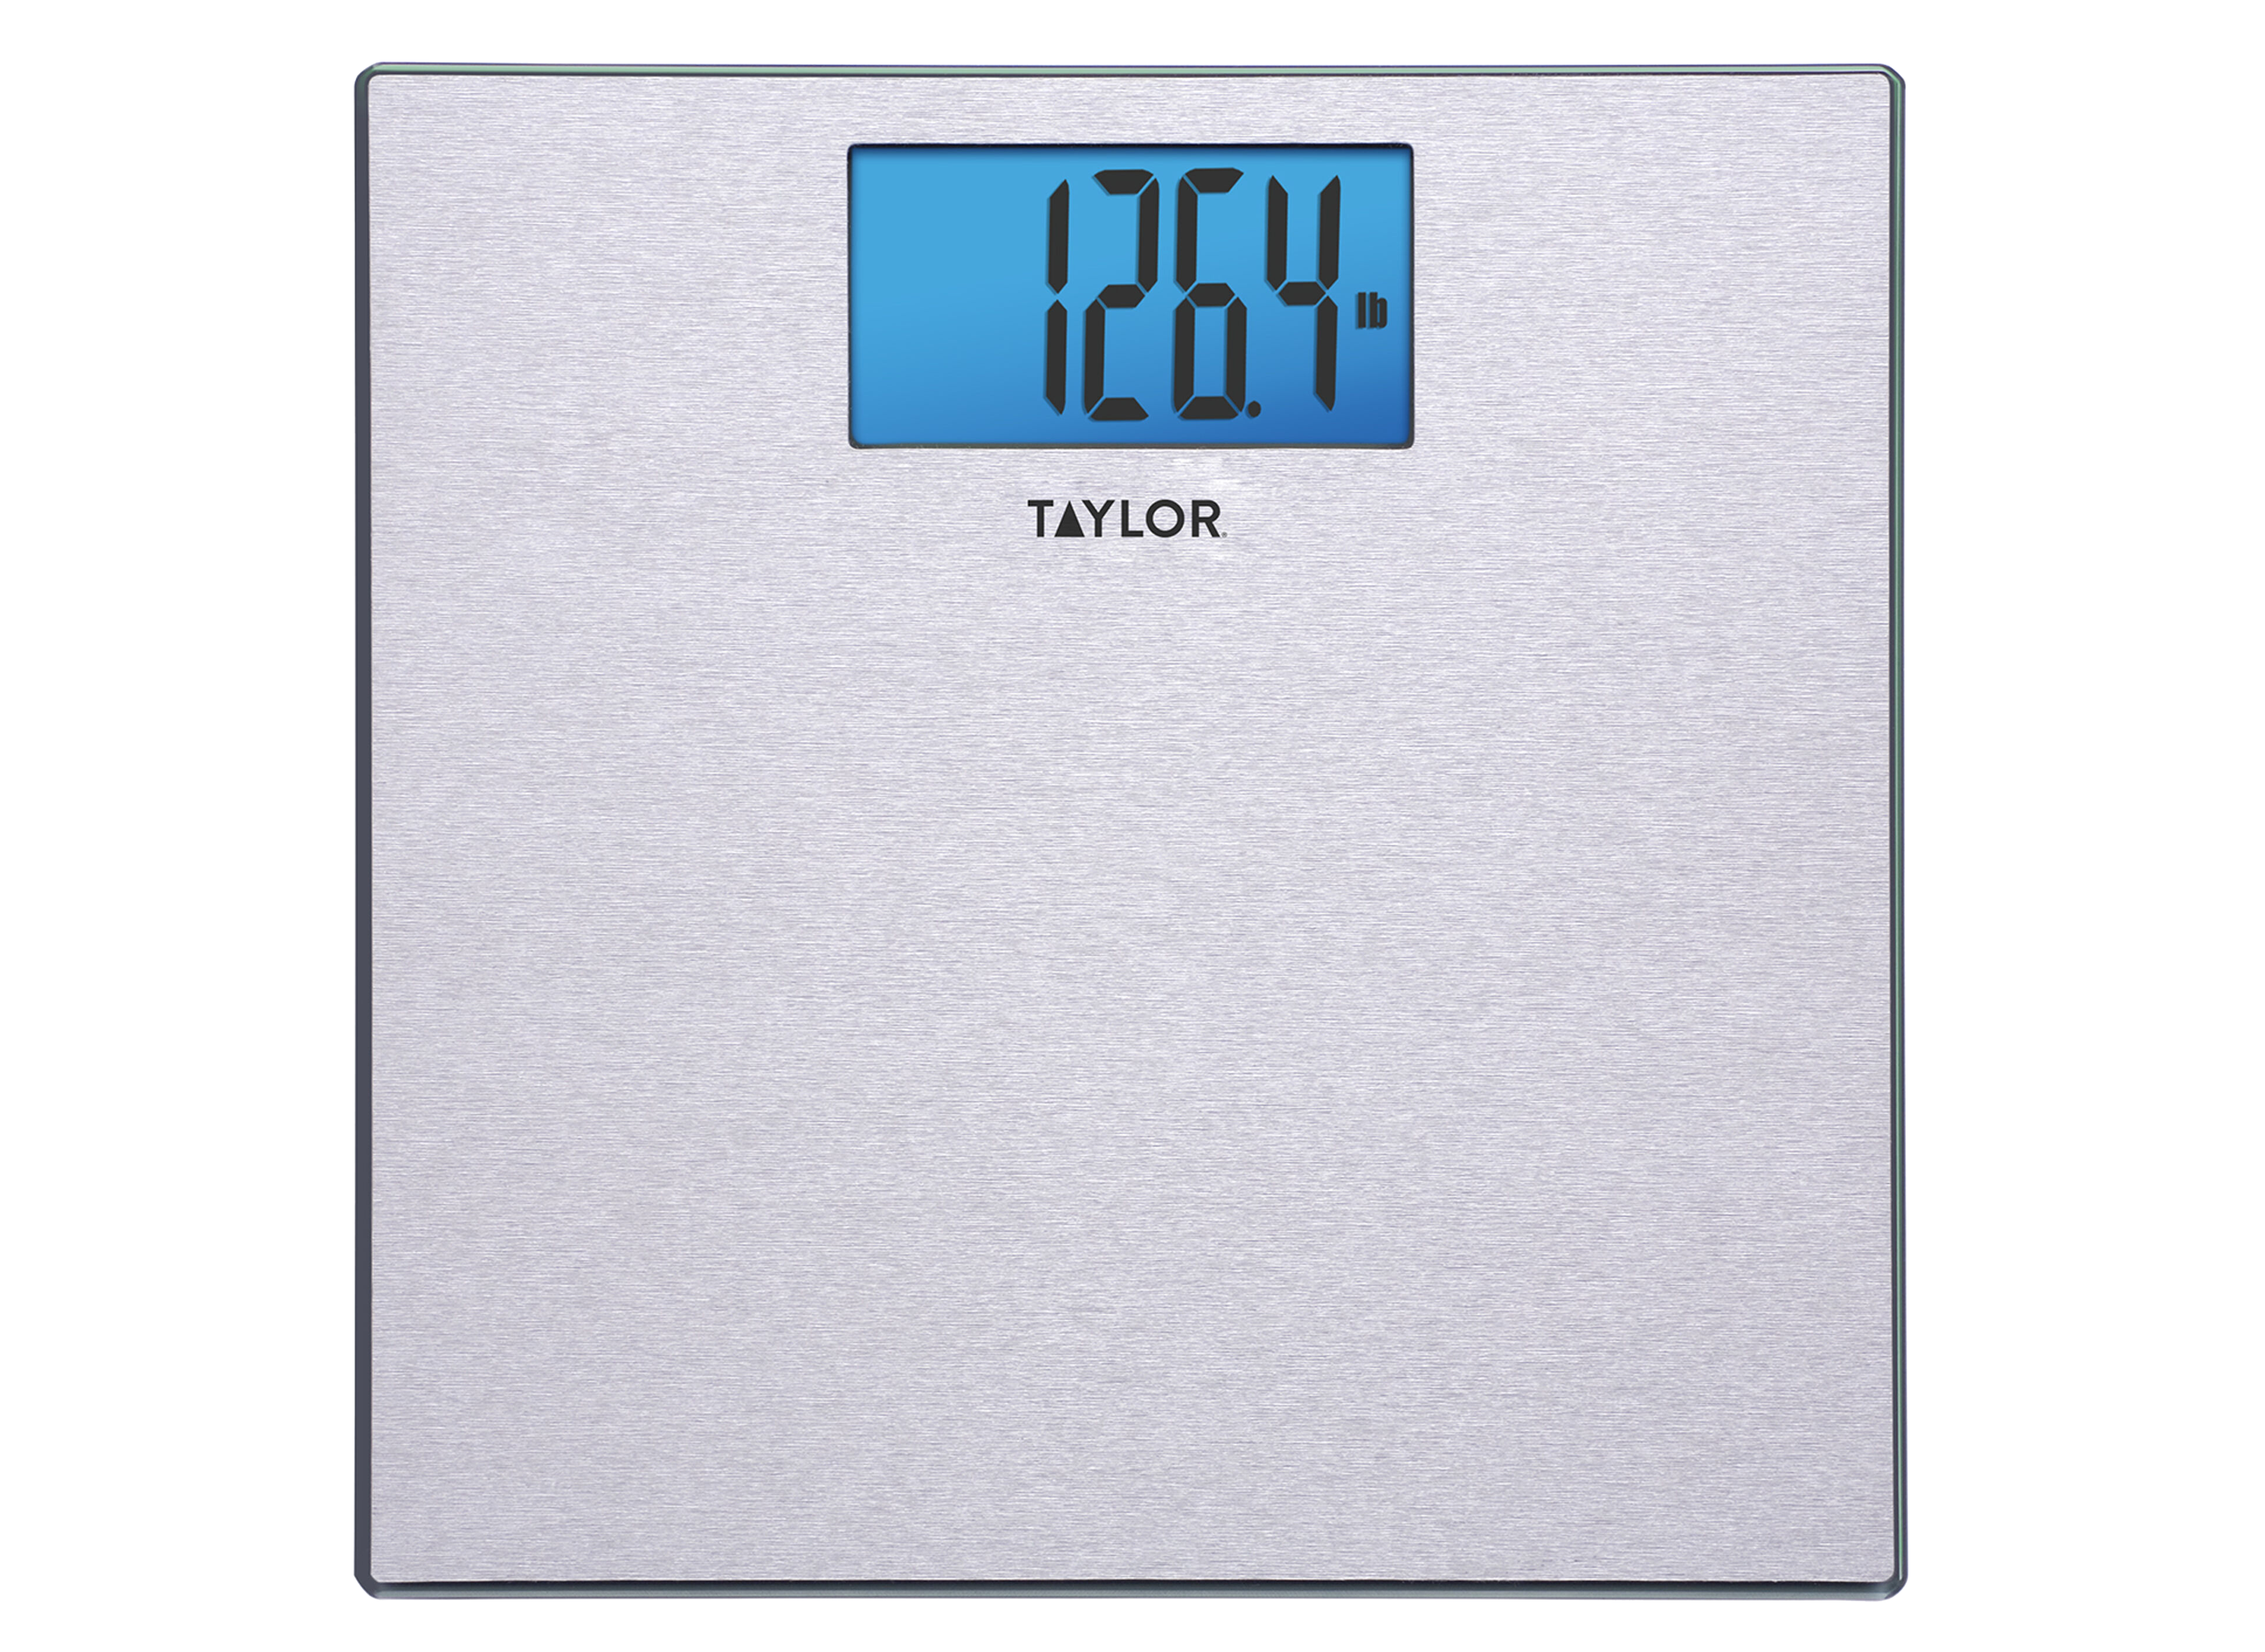 https://crdms.images.consumerreports.org/prod/products/cr/models/402909-digital-scales-taylor-7413-10017551.png